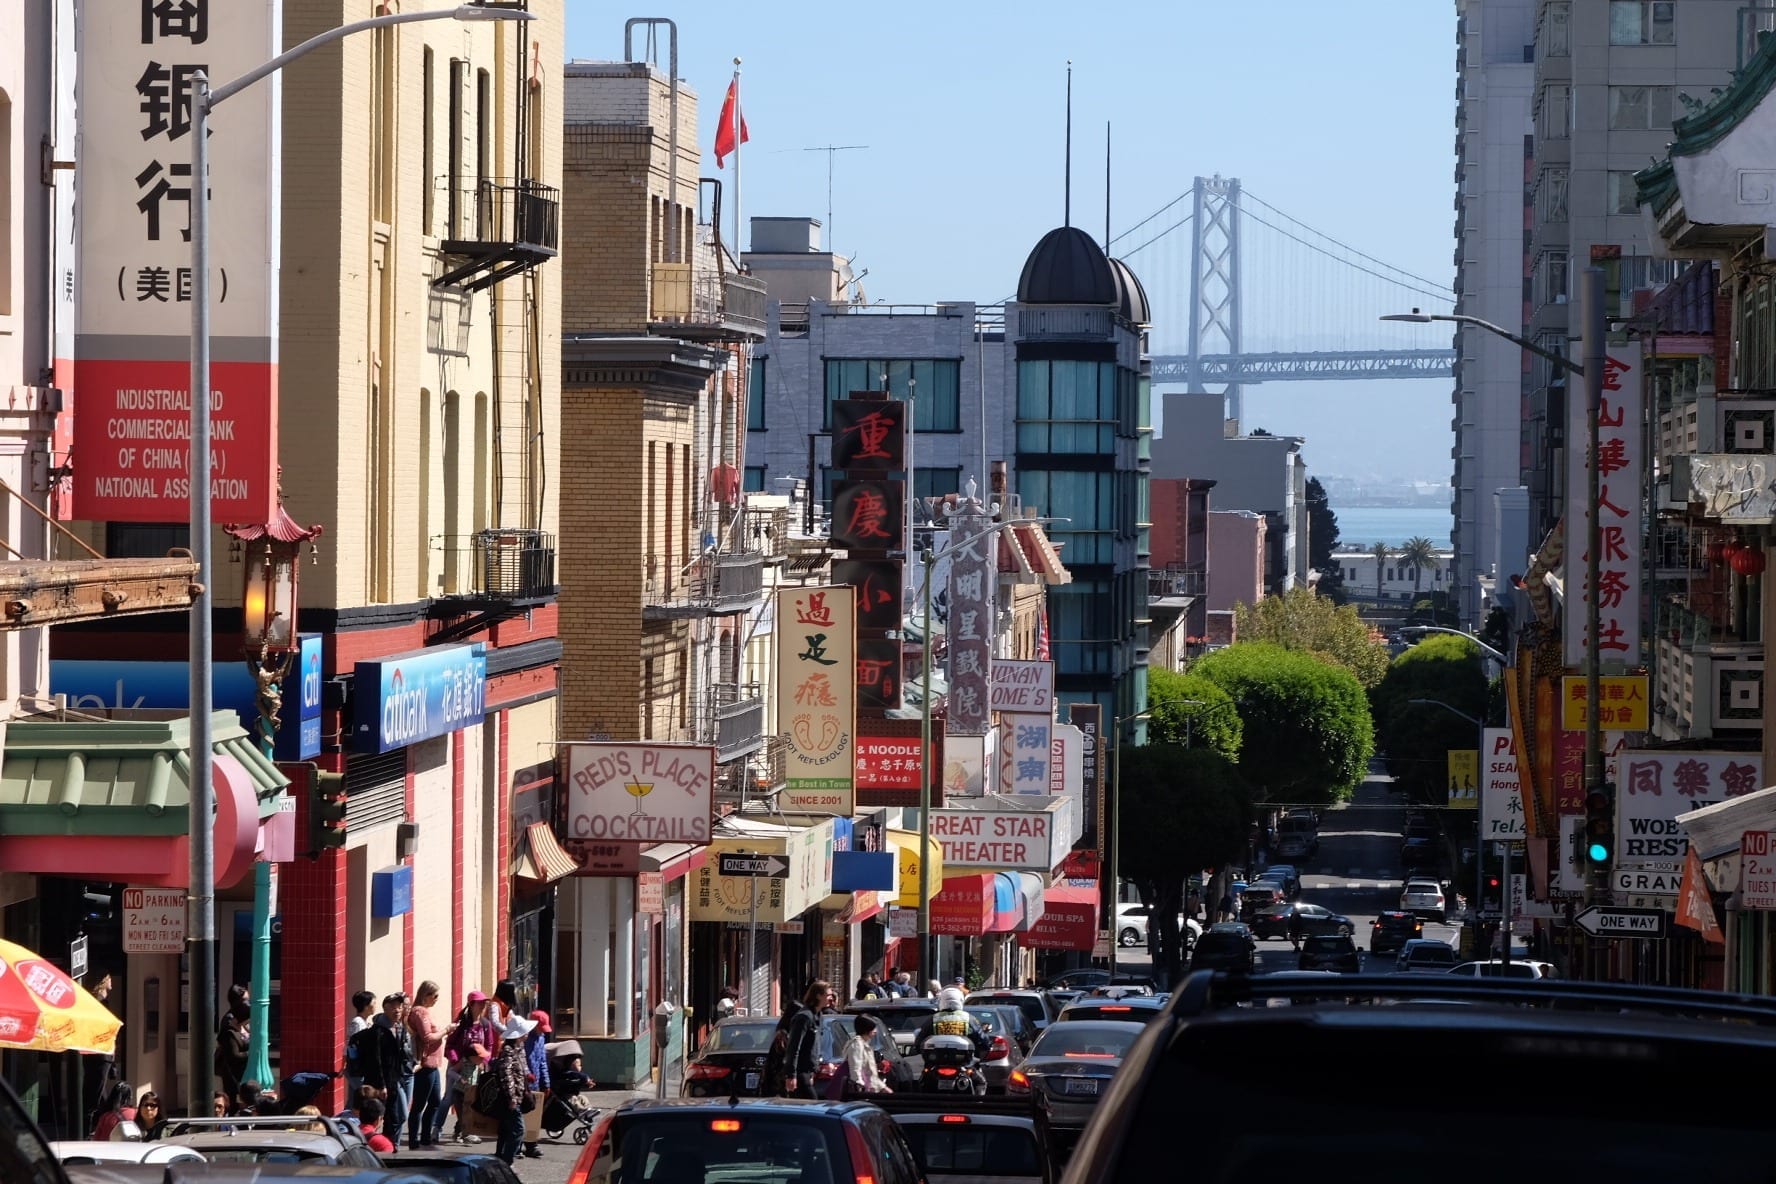 View over Chinatown in San Francisco, lots of store signs jutting out at angles, leading to a bridge underneath a blue sky.